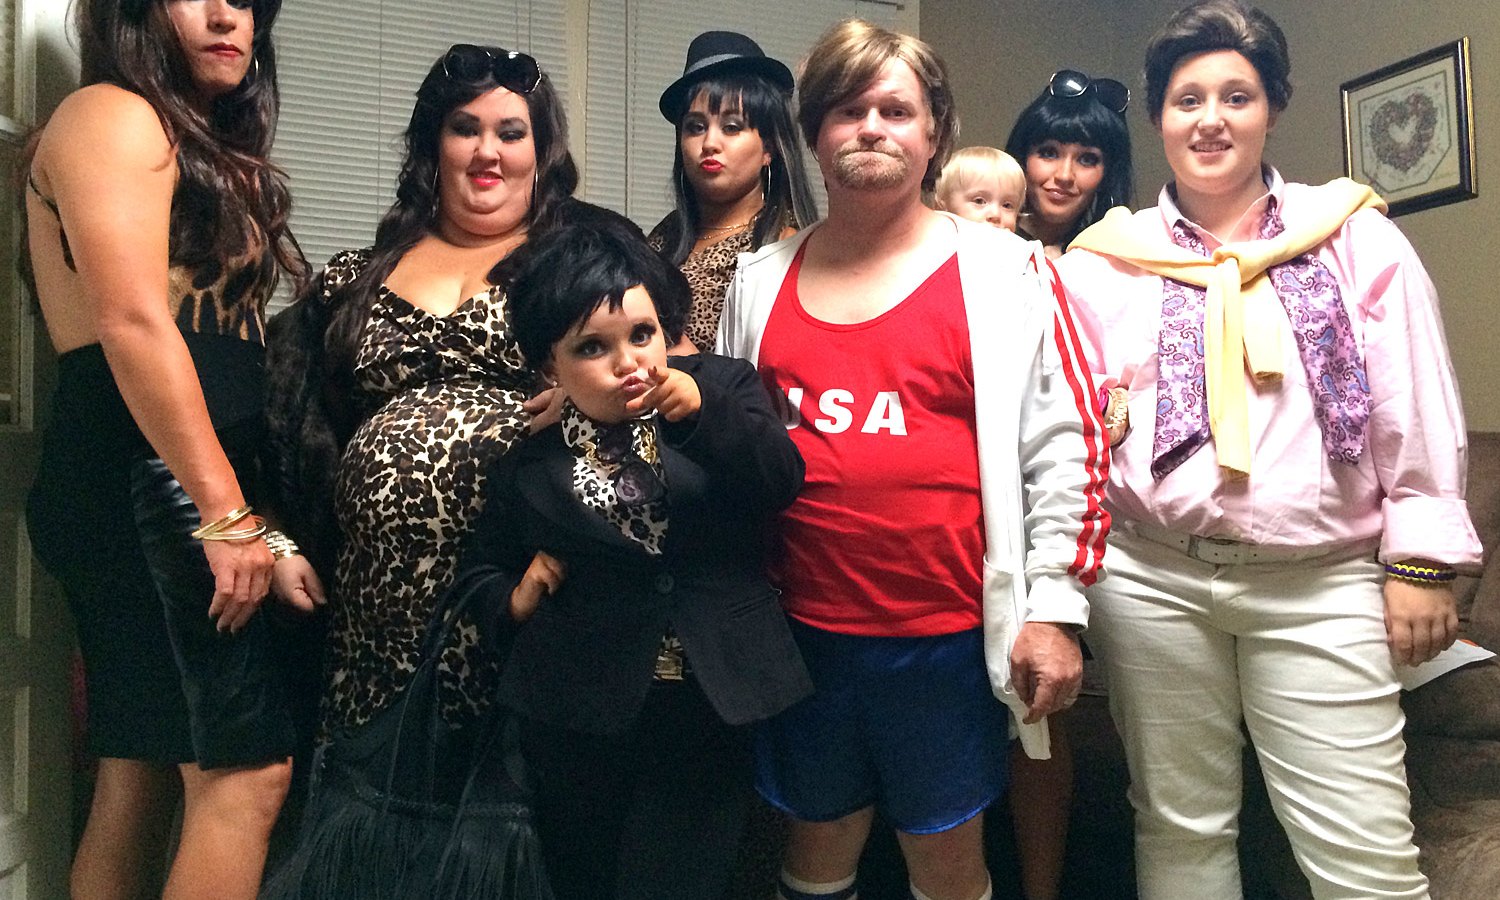 Honey Boo Boo and Family dress up as The Kardashians for Halloween